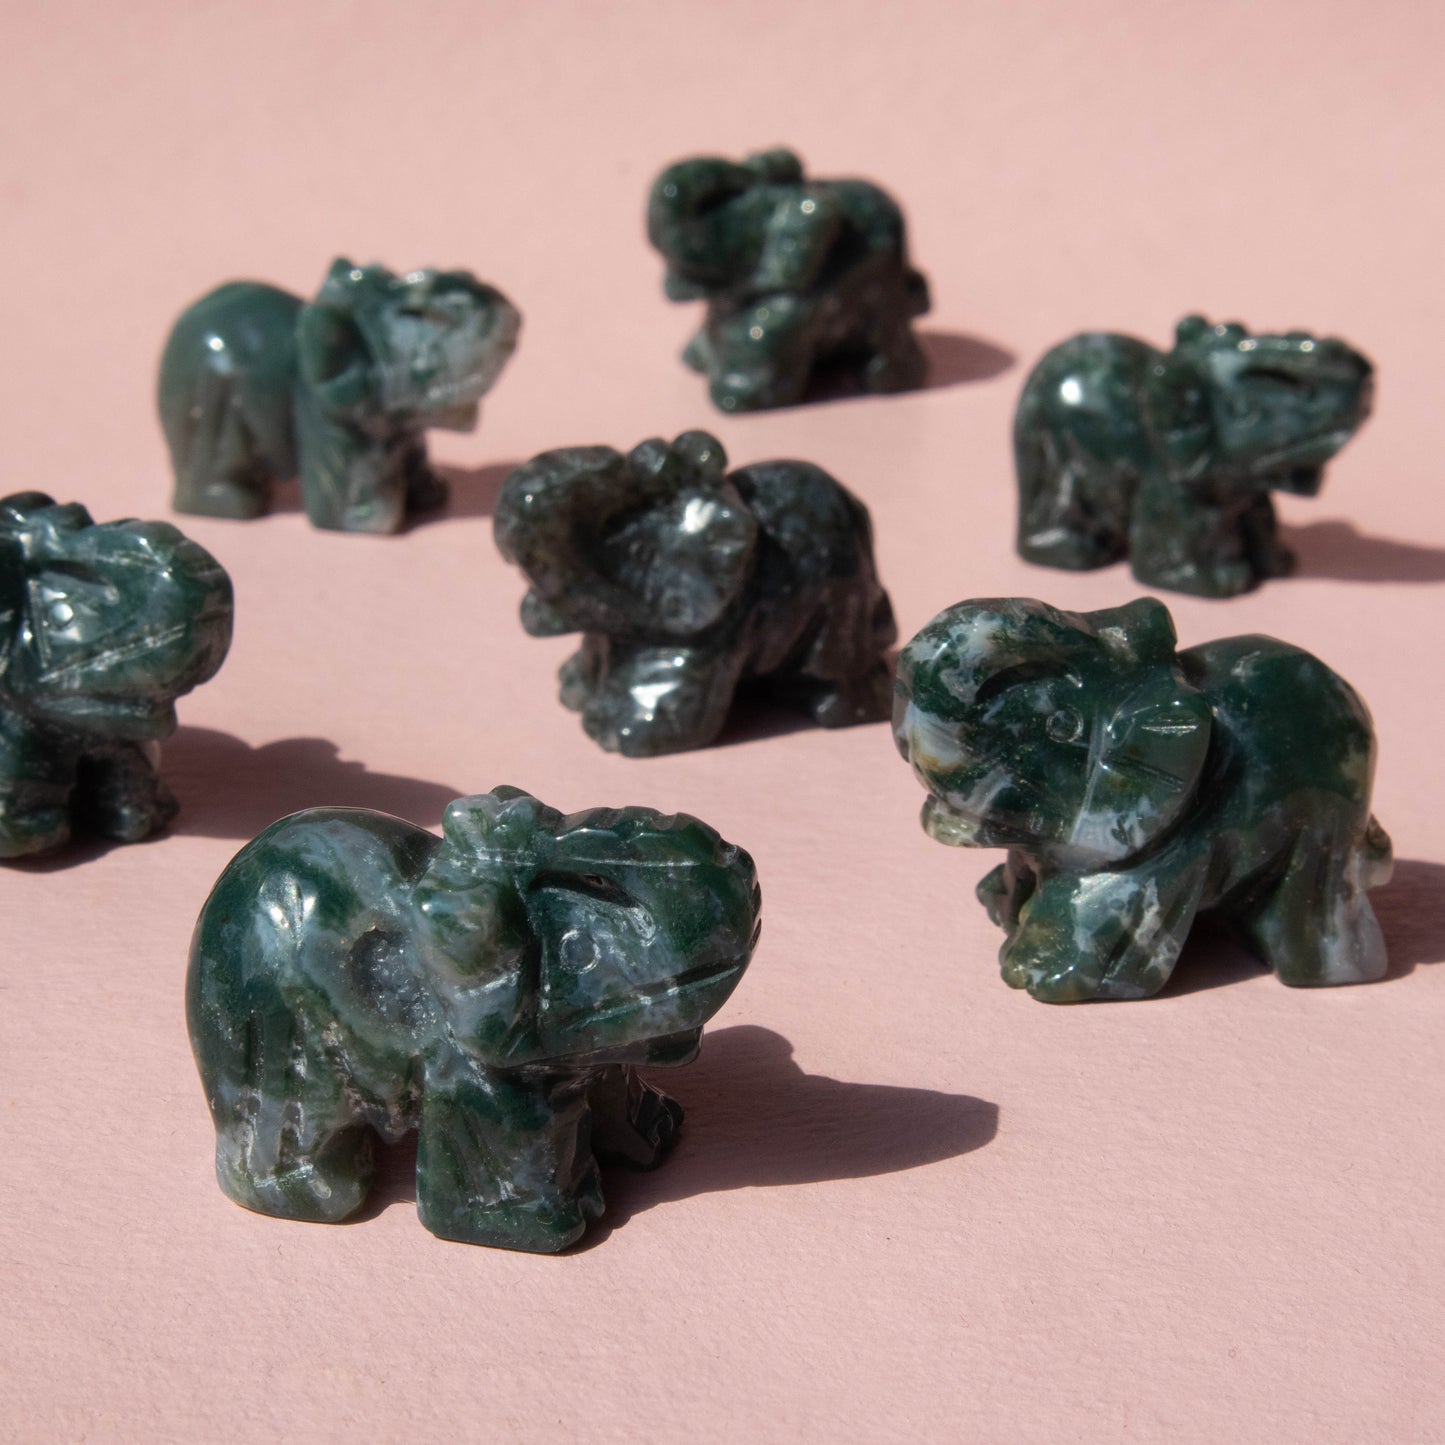 moss agate, moss agate elephant, moss agate animal, crystal animal, crystal elephant, gemstone elephant, gemstone animal, moss agate crystal, moss agate stone, moss agate properties, moss agate healing properties, moss agate metaphysical properties, moss agate meaning